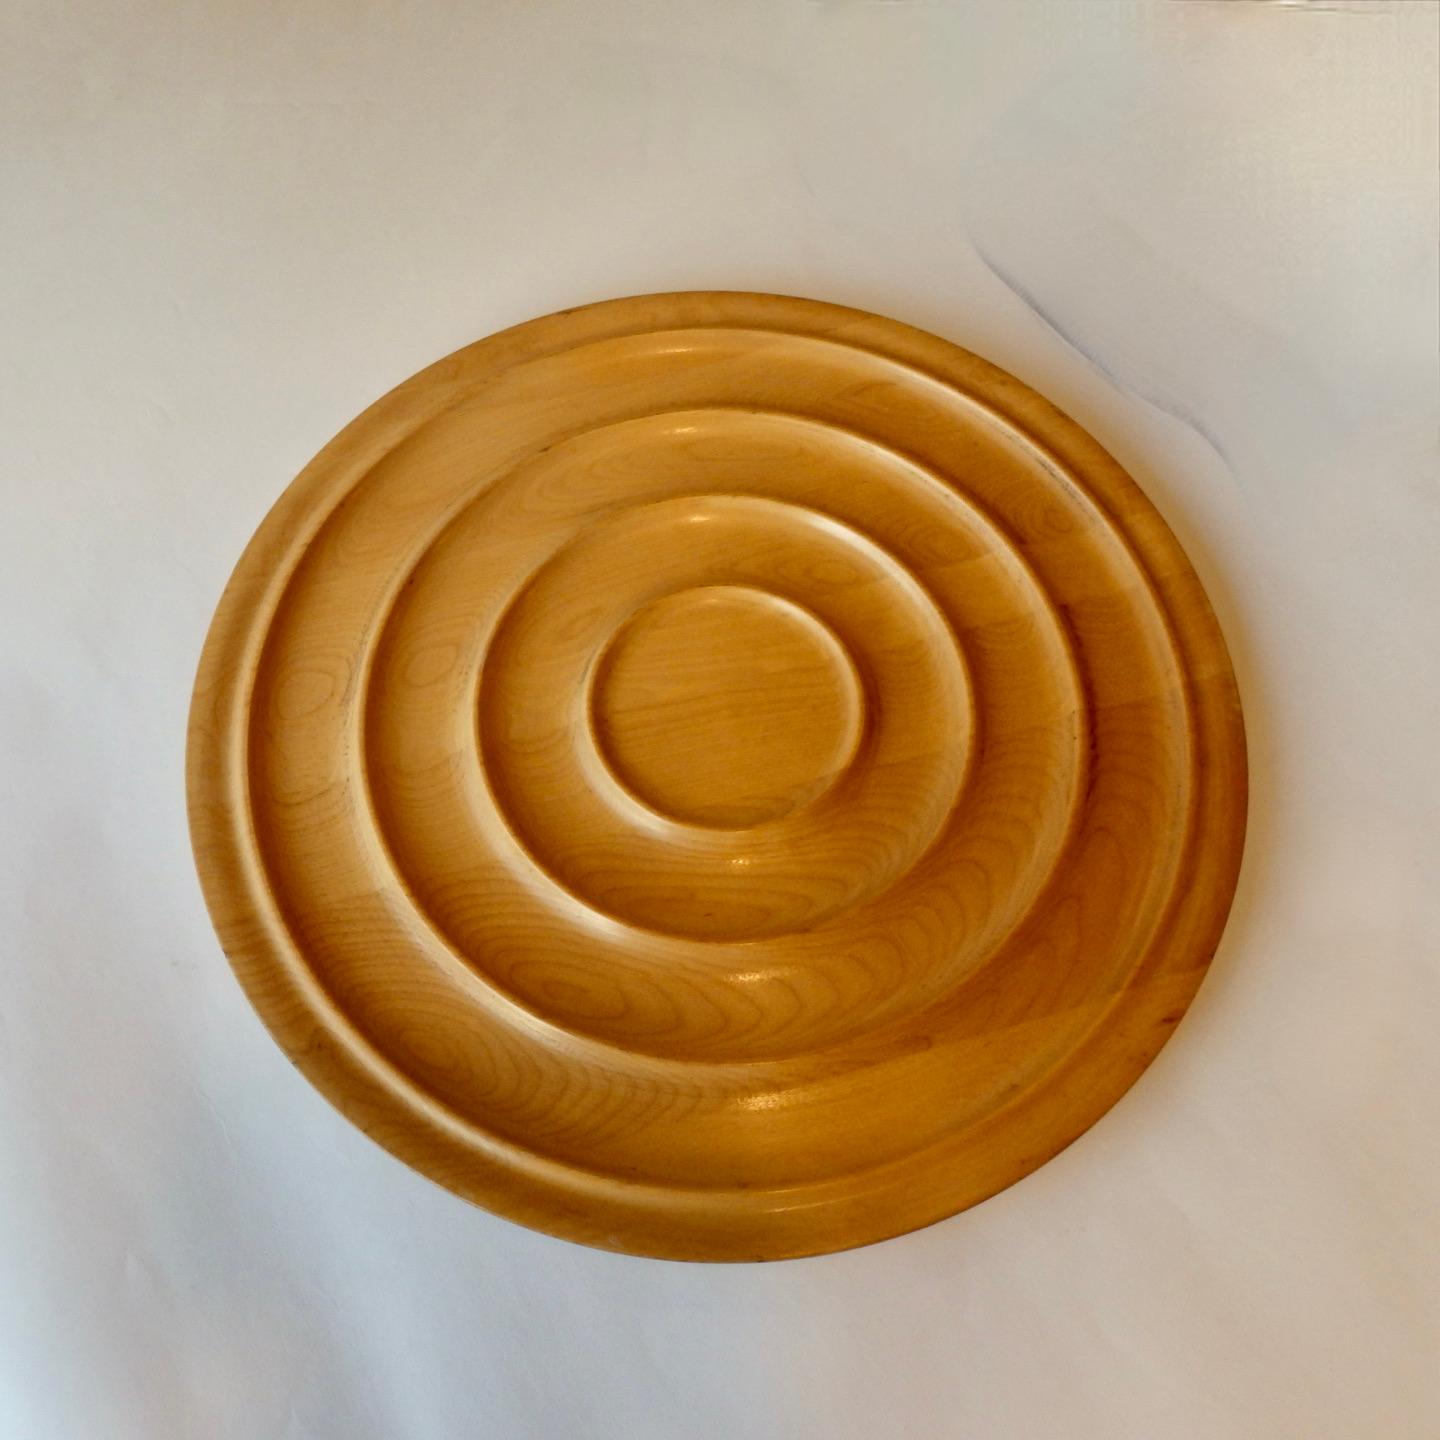 Nicely turned maple wood charger. Concentric ring design in the manner of Russel Wright.